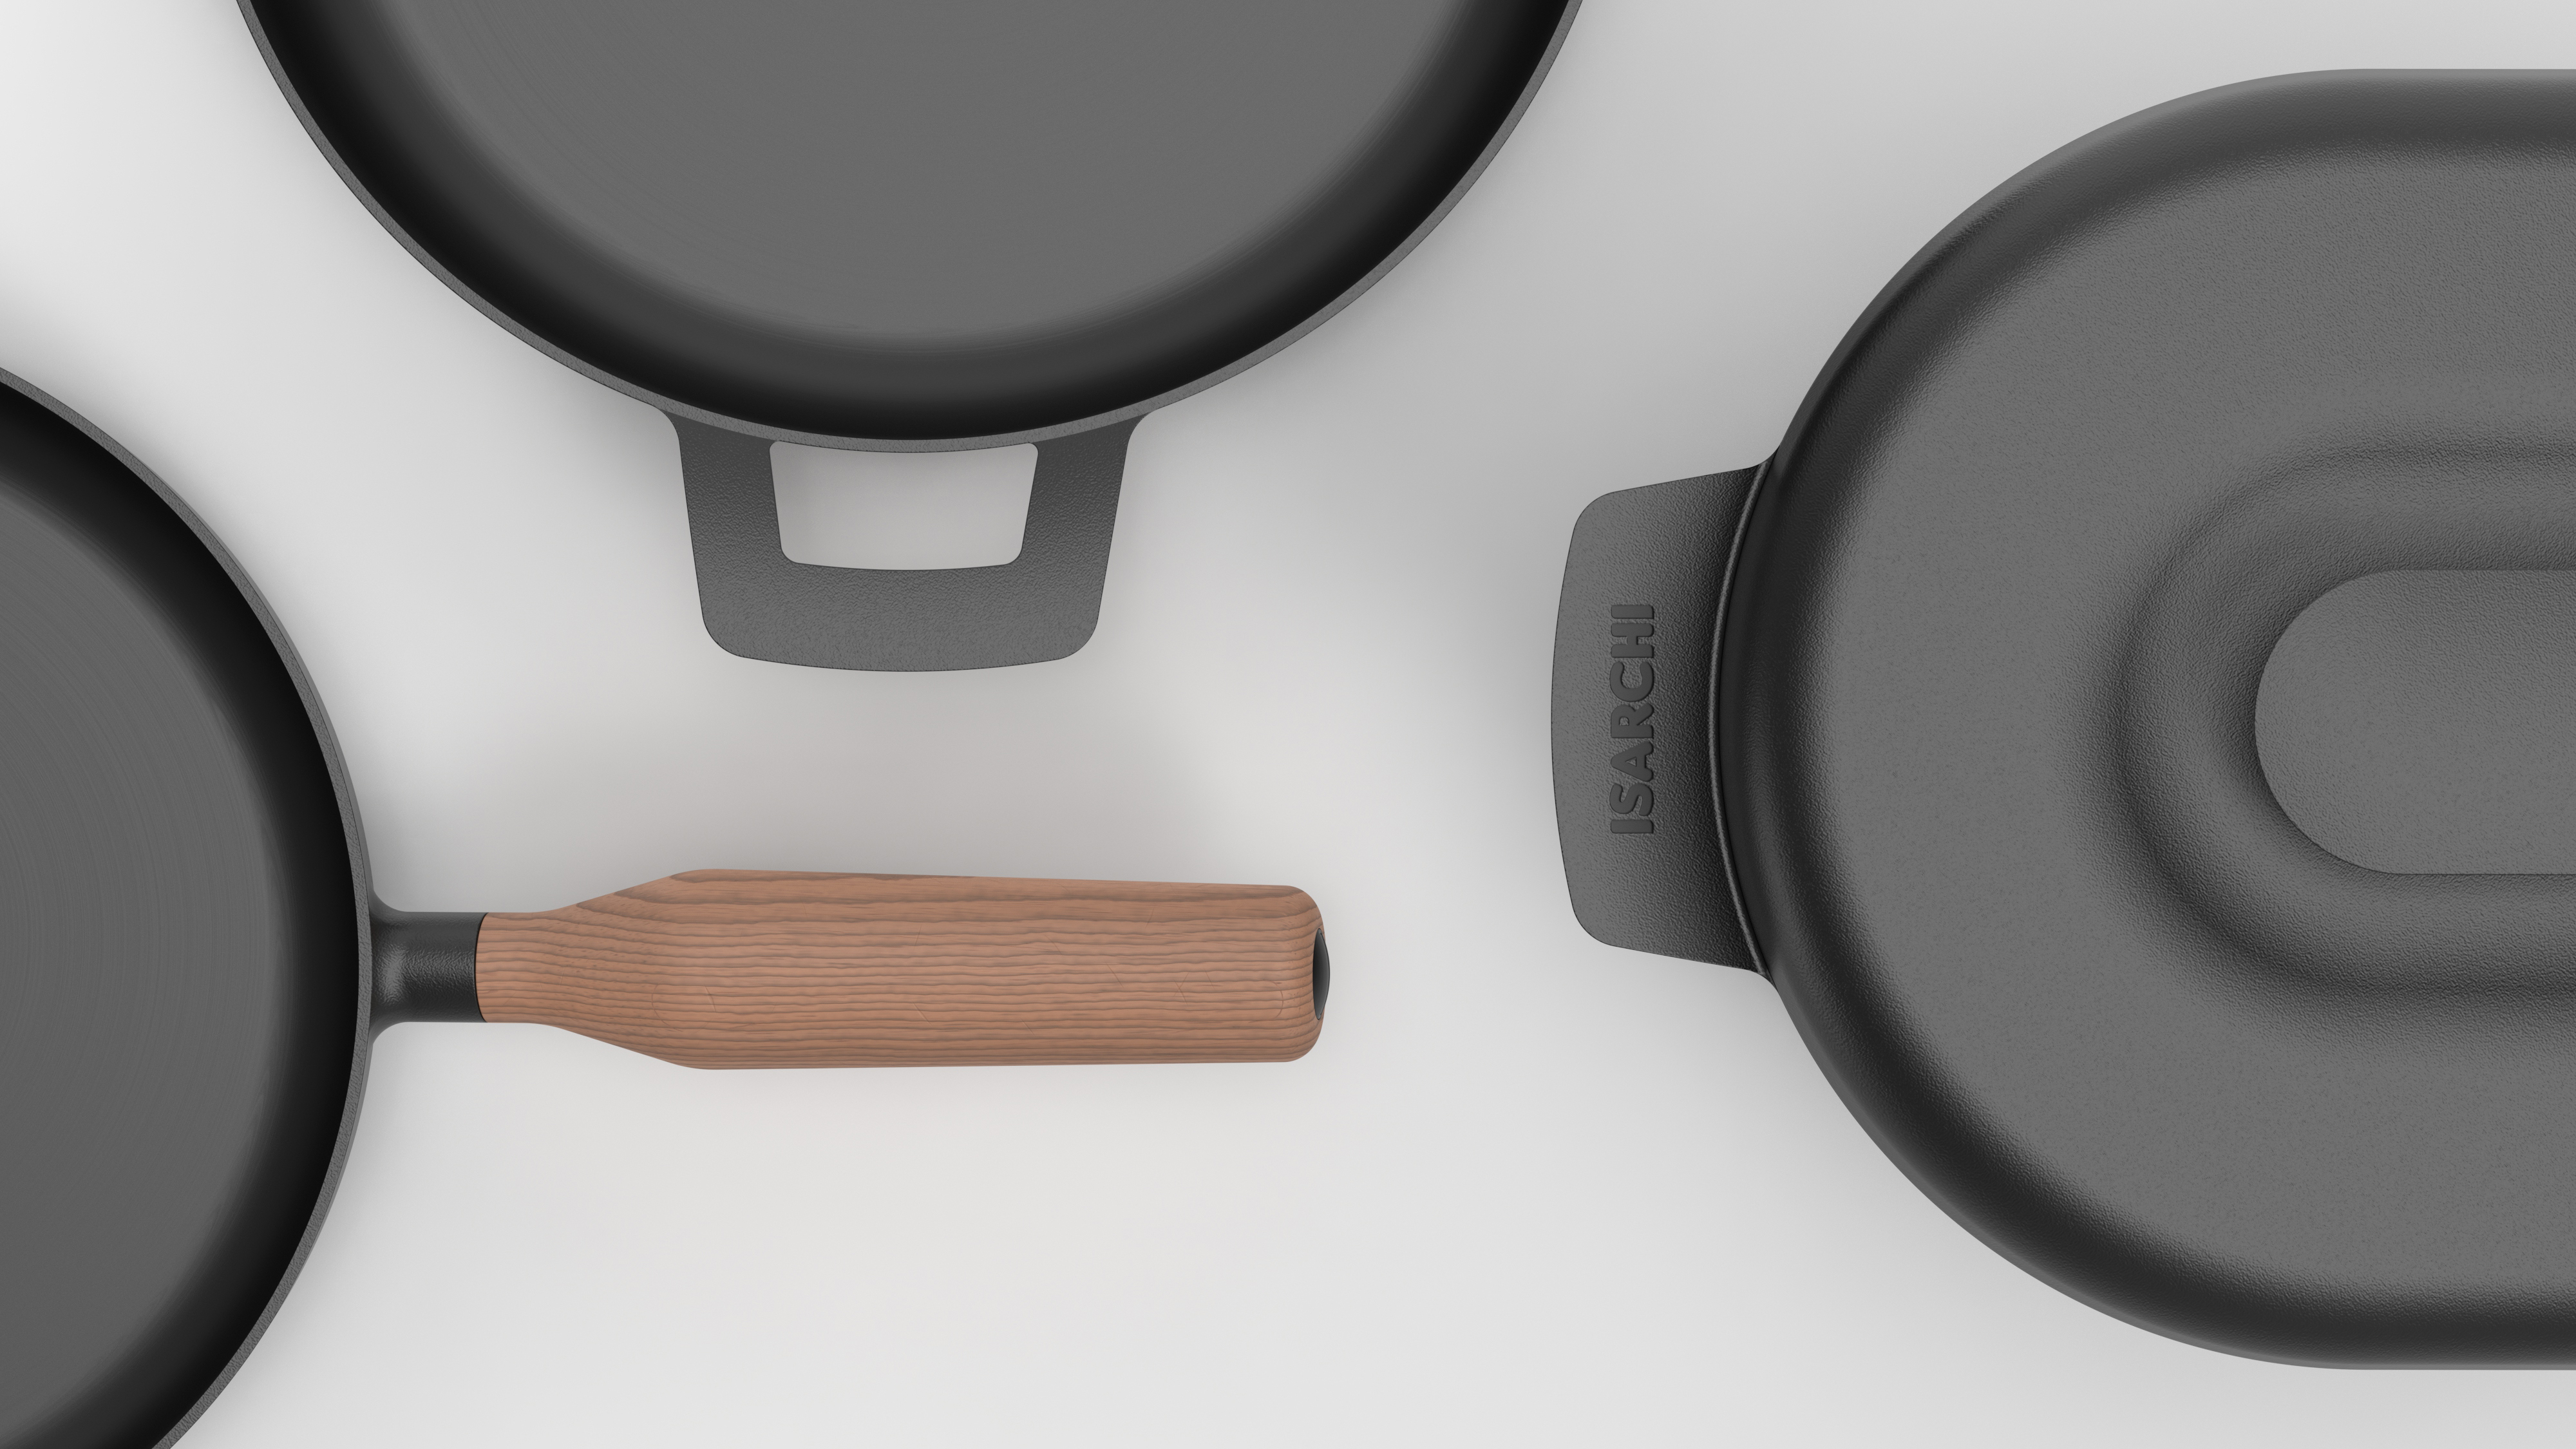 ISARCHI cookware series